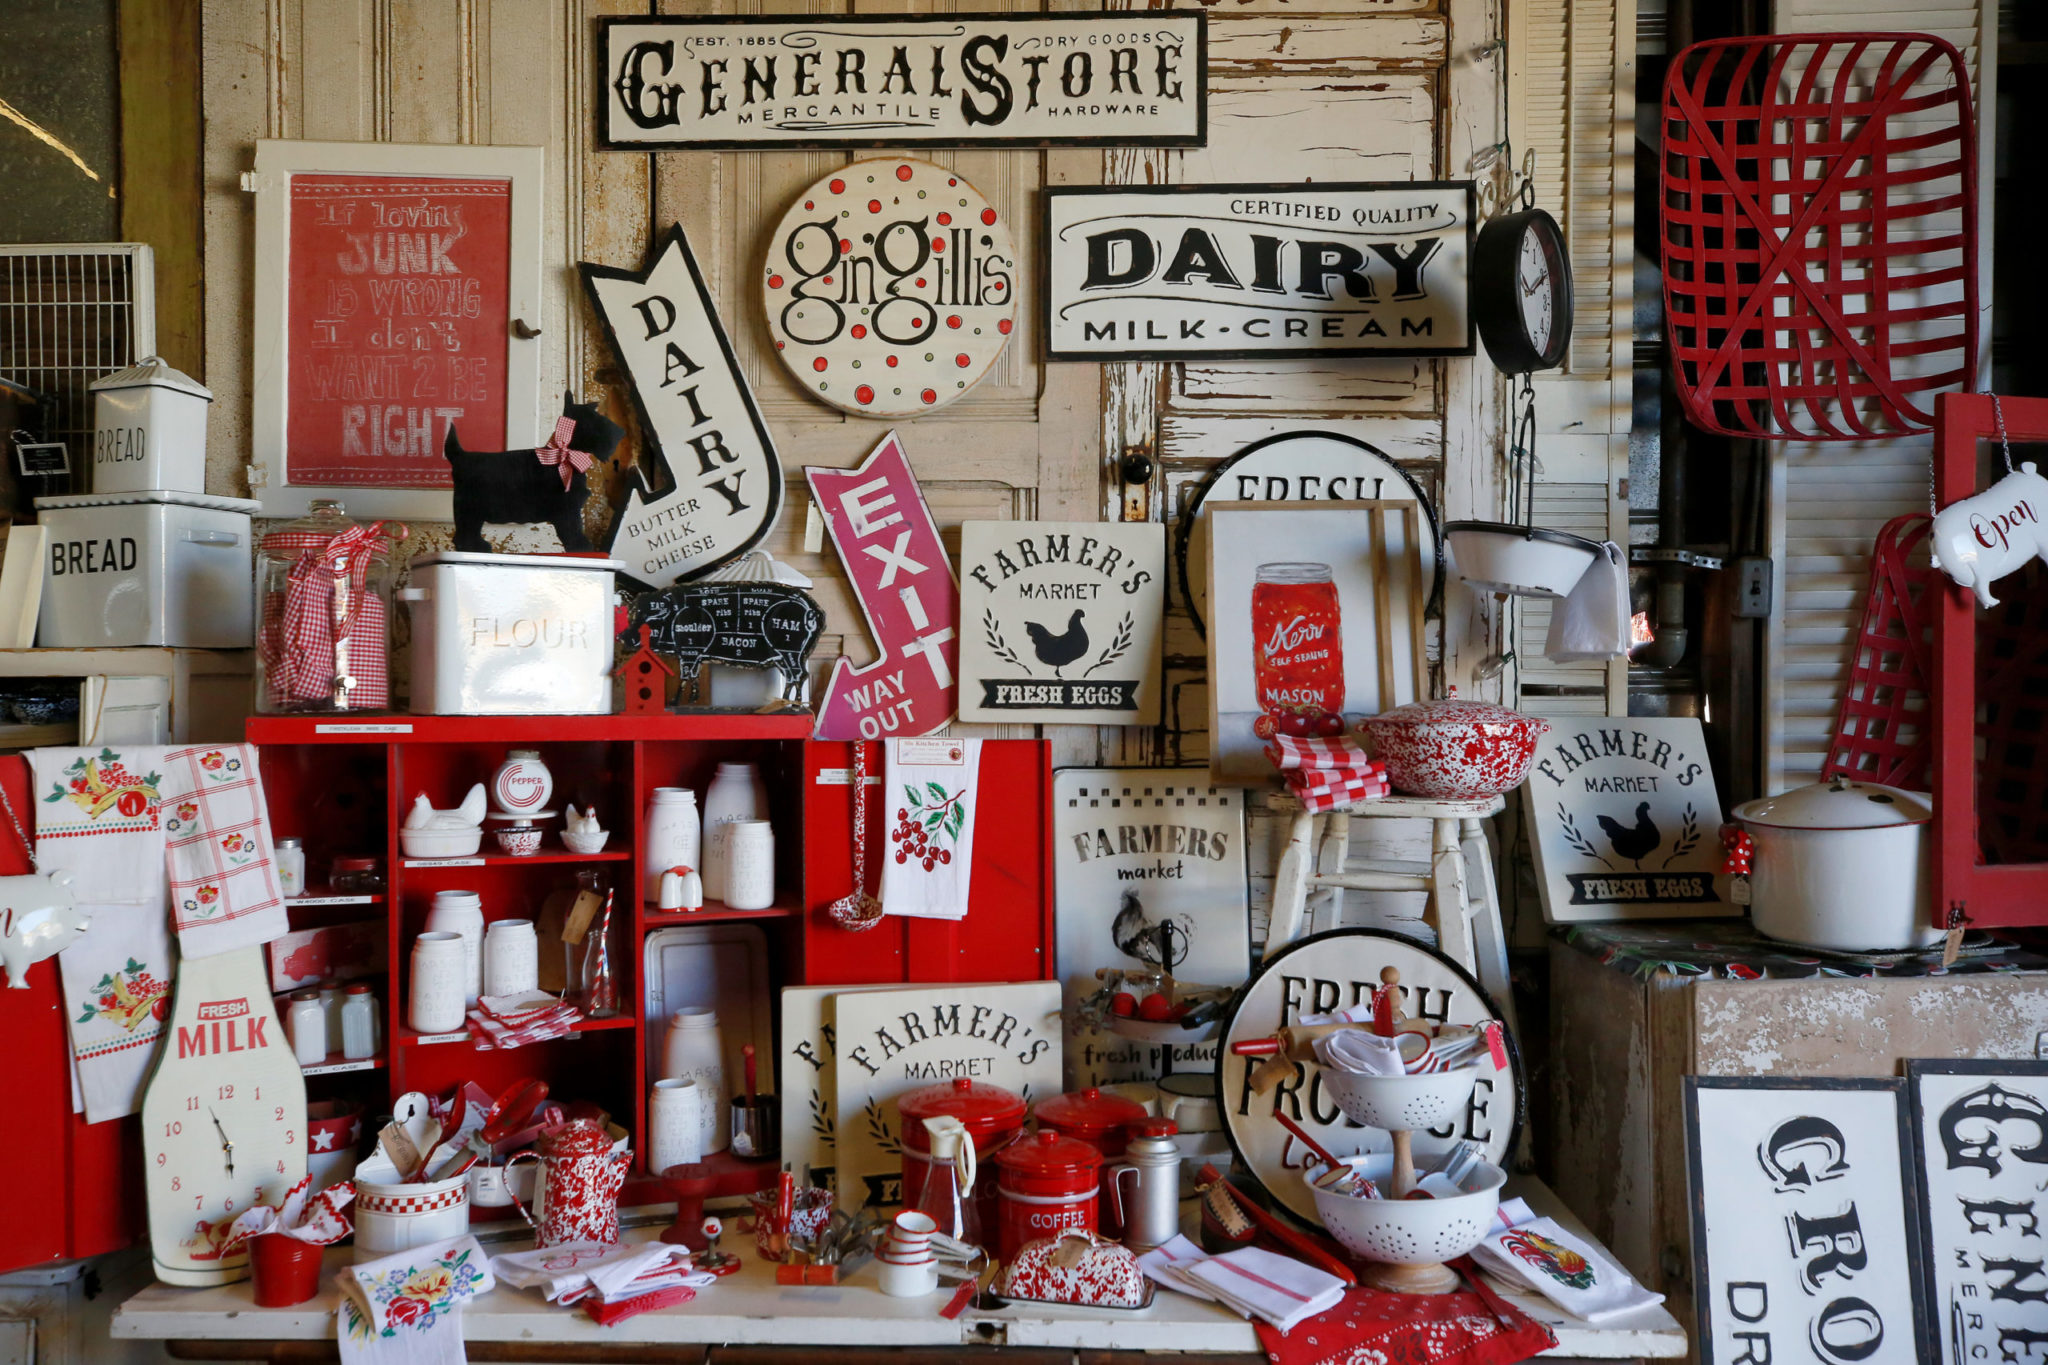 A variety of goods for sale at Gin'gilli's Vintage Home in Geyserville, California, on Tuesday, July 30, 2019. (Alvin Jornada / The Press Democrat)